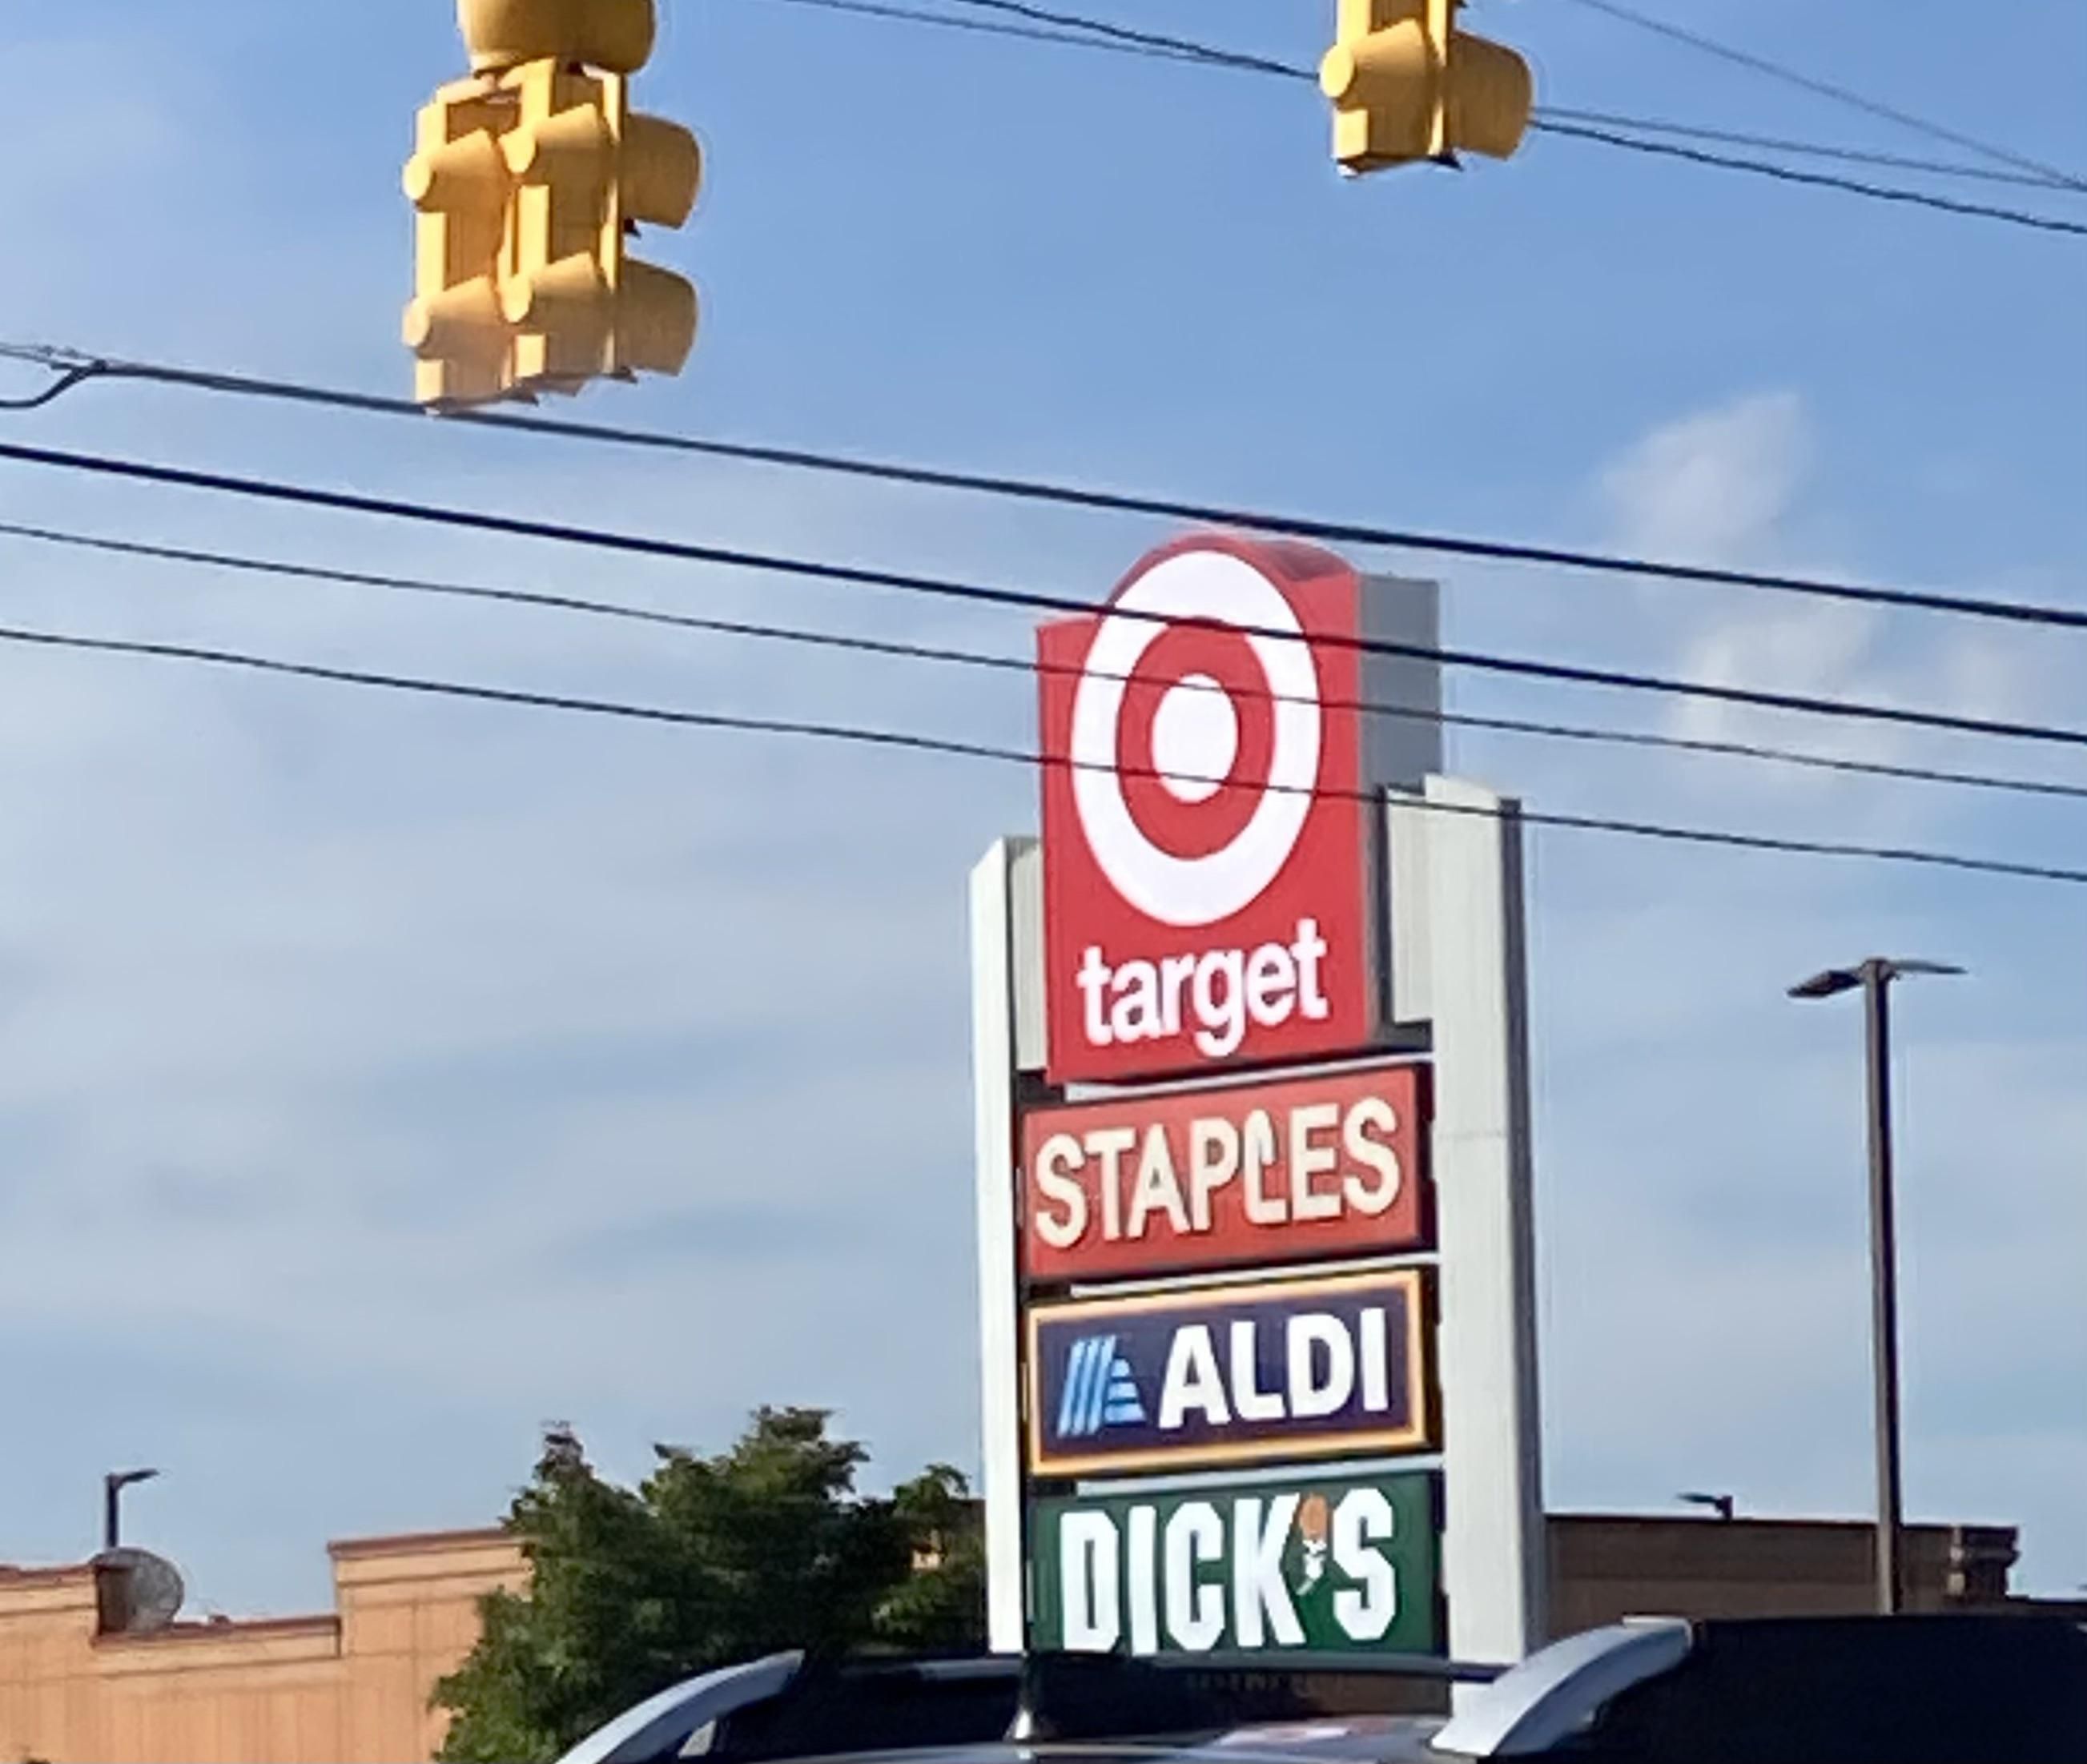 Target does what?